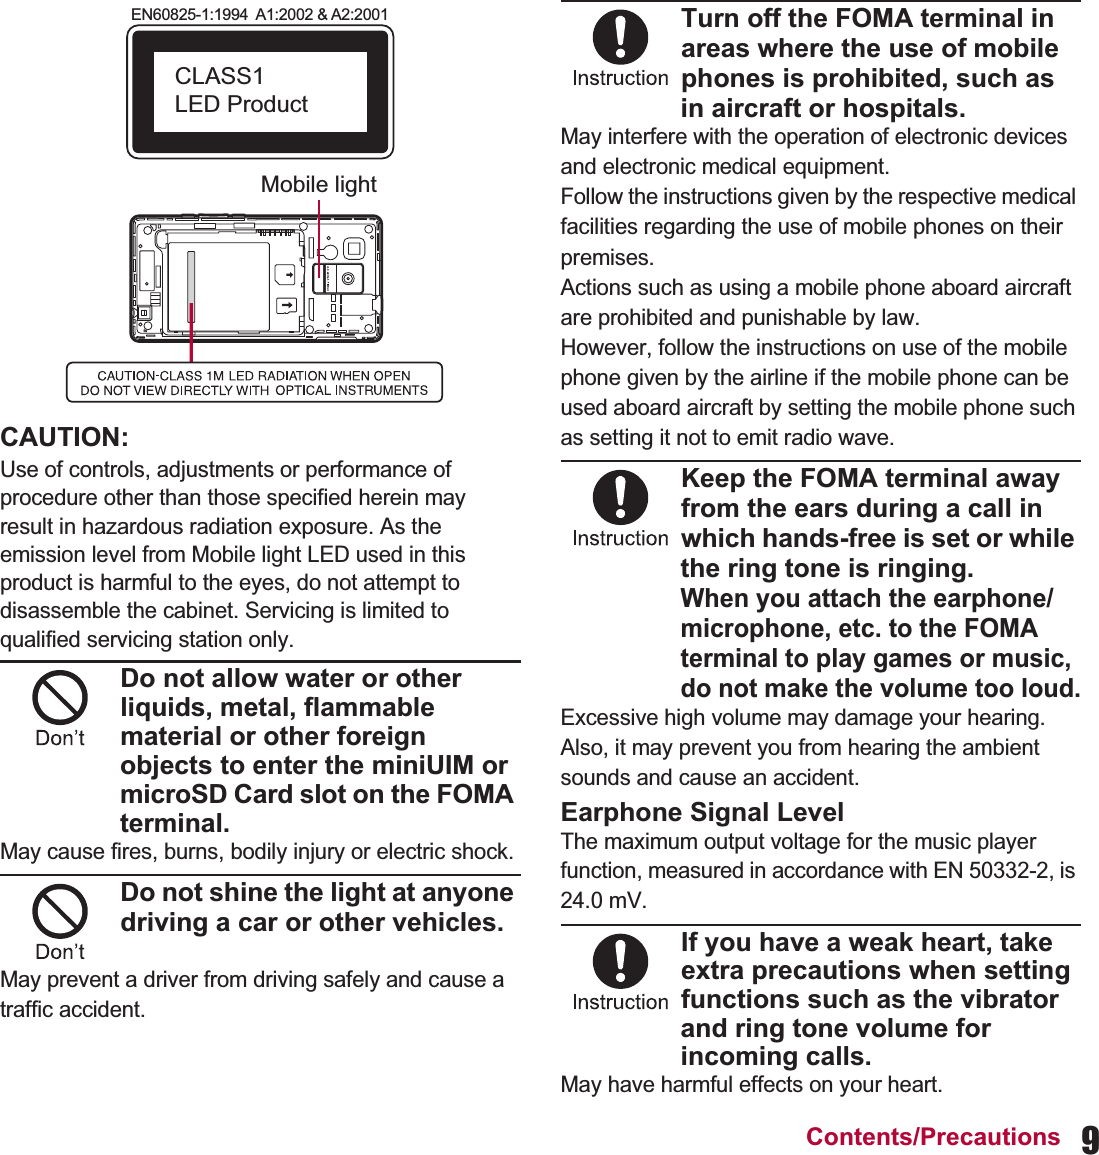 9Contents/PrecautionsCAUTION:Use of controls, adjustments or performance of procedure other than those specified herein may result in hazardous radiation exposure. As the emission level from Mobile light LED used in this product is harmful to the eyes, do not attempt to disassemble the cabinet. Servicing is limited to qualified servicing station only.Do not allow water or other liquids, metal, flammable material or other foreign objects to enter the miniUIM or microSD Card slot on the FOMA terminal.May cause fires, burns, bodily injury or electric shock.Do not shine the light at anyone driving a car or other vehicles.May prevent a driver from driving safely and cause a traffic accident.Turn off the FOMA terminal in areas where the use of mobile phones is prohibited, such as in aircraft or hospitals.May interfere with the operation of electronic devices and electronic medical equipment.Follow the instructions given by the respective medical facilities regarding the use of mobile phones on their premises.Actions such as using a mobile phone aboard aircraft are prohibited and punishable by law.However, follow the instructions on use of the mobile phone given by the airline if the mobile phone can be used aboard aircraft by setting the mobile phone such as setting it not to emit radio wave.Keep the FOMA terminal away from the ears during a call in which hands-free is set or while the ring tone is ringing.When you attach the earphone/microphone, etc. to the FOMA terminal to play games or music, do not make the volume too loud.Excessive high volume may damage your hearing.Also, it may prevent you from hearing the ambient sounds and cause an accident.Earphone Signal LevelThe maximum output voltage for the music player function, measured in accordance with EN 50332-2, is 24.0 mV.If you have a weak heart, take extra precautions when setting functions such as the vibrator and ring tone volume for incoming calls.May have harmful effects on your heart.EN60825-1:1994  A1:2002 &amp; A2:2001CLASS1 LED ProductMobile light